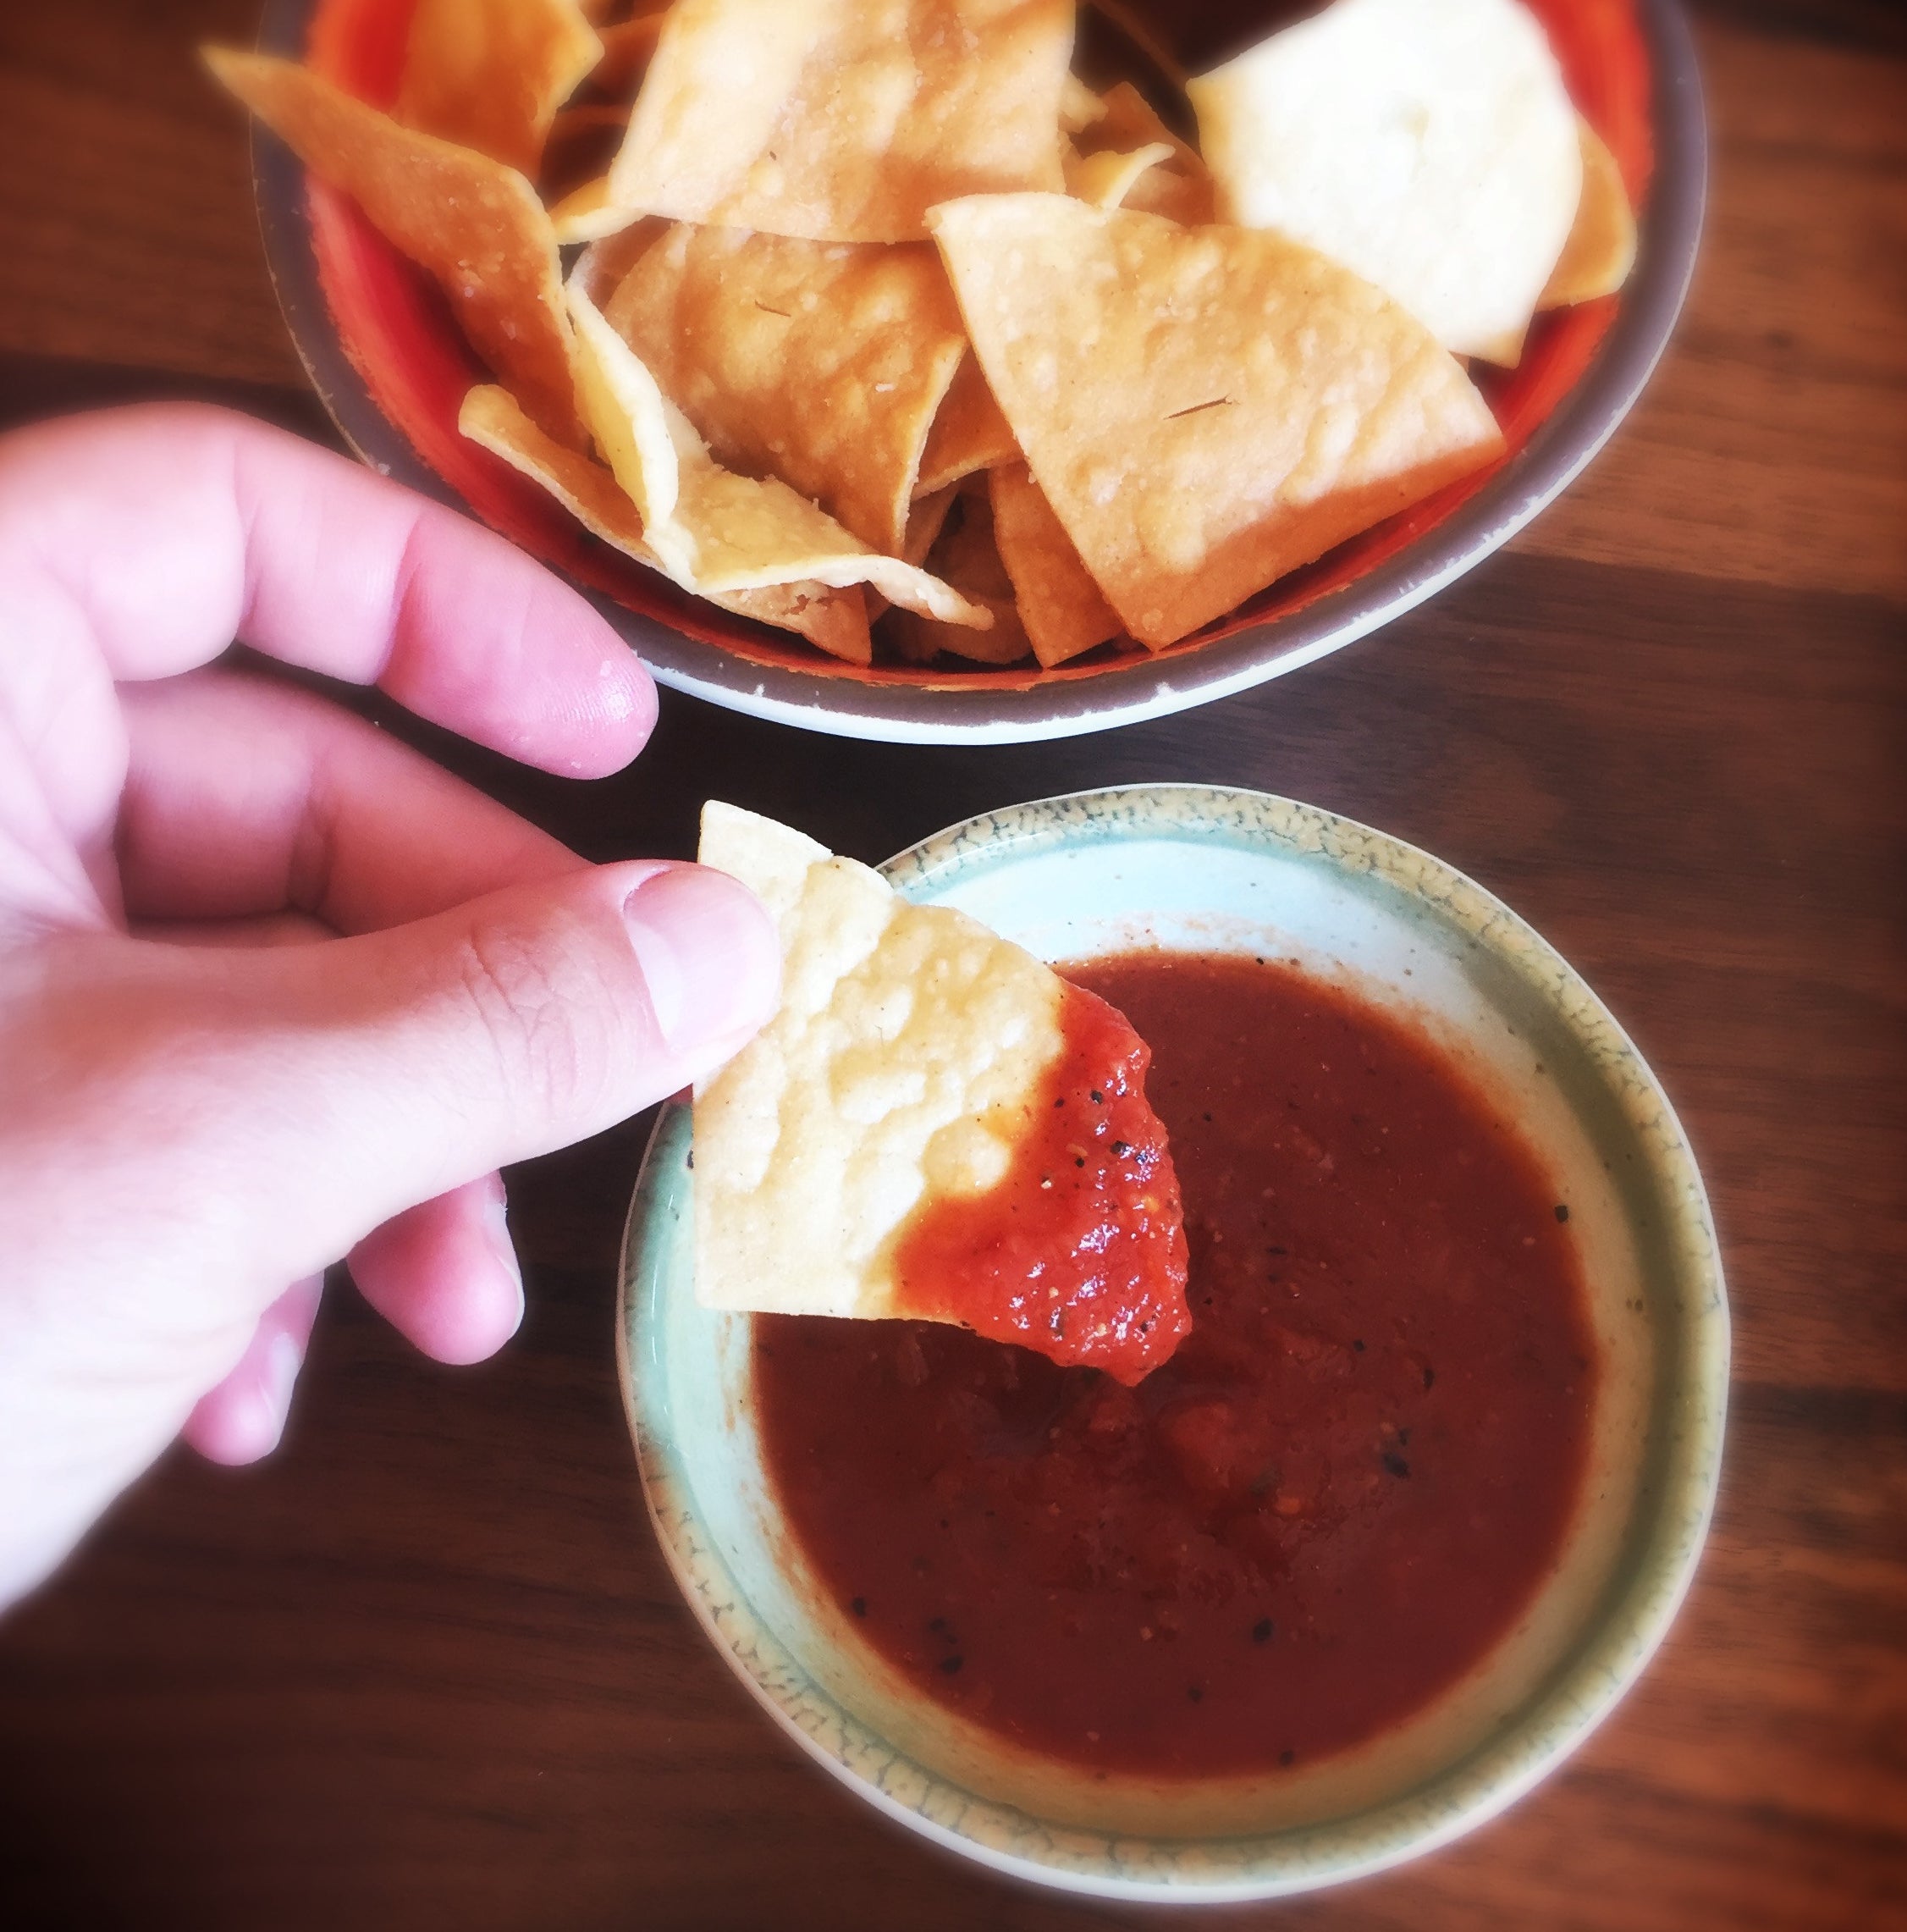 A hand dipping chips into salsa.